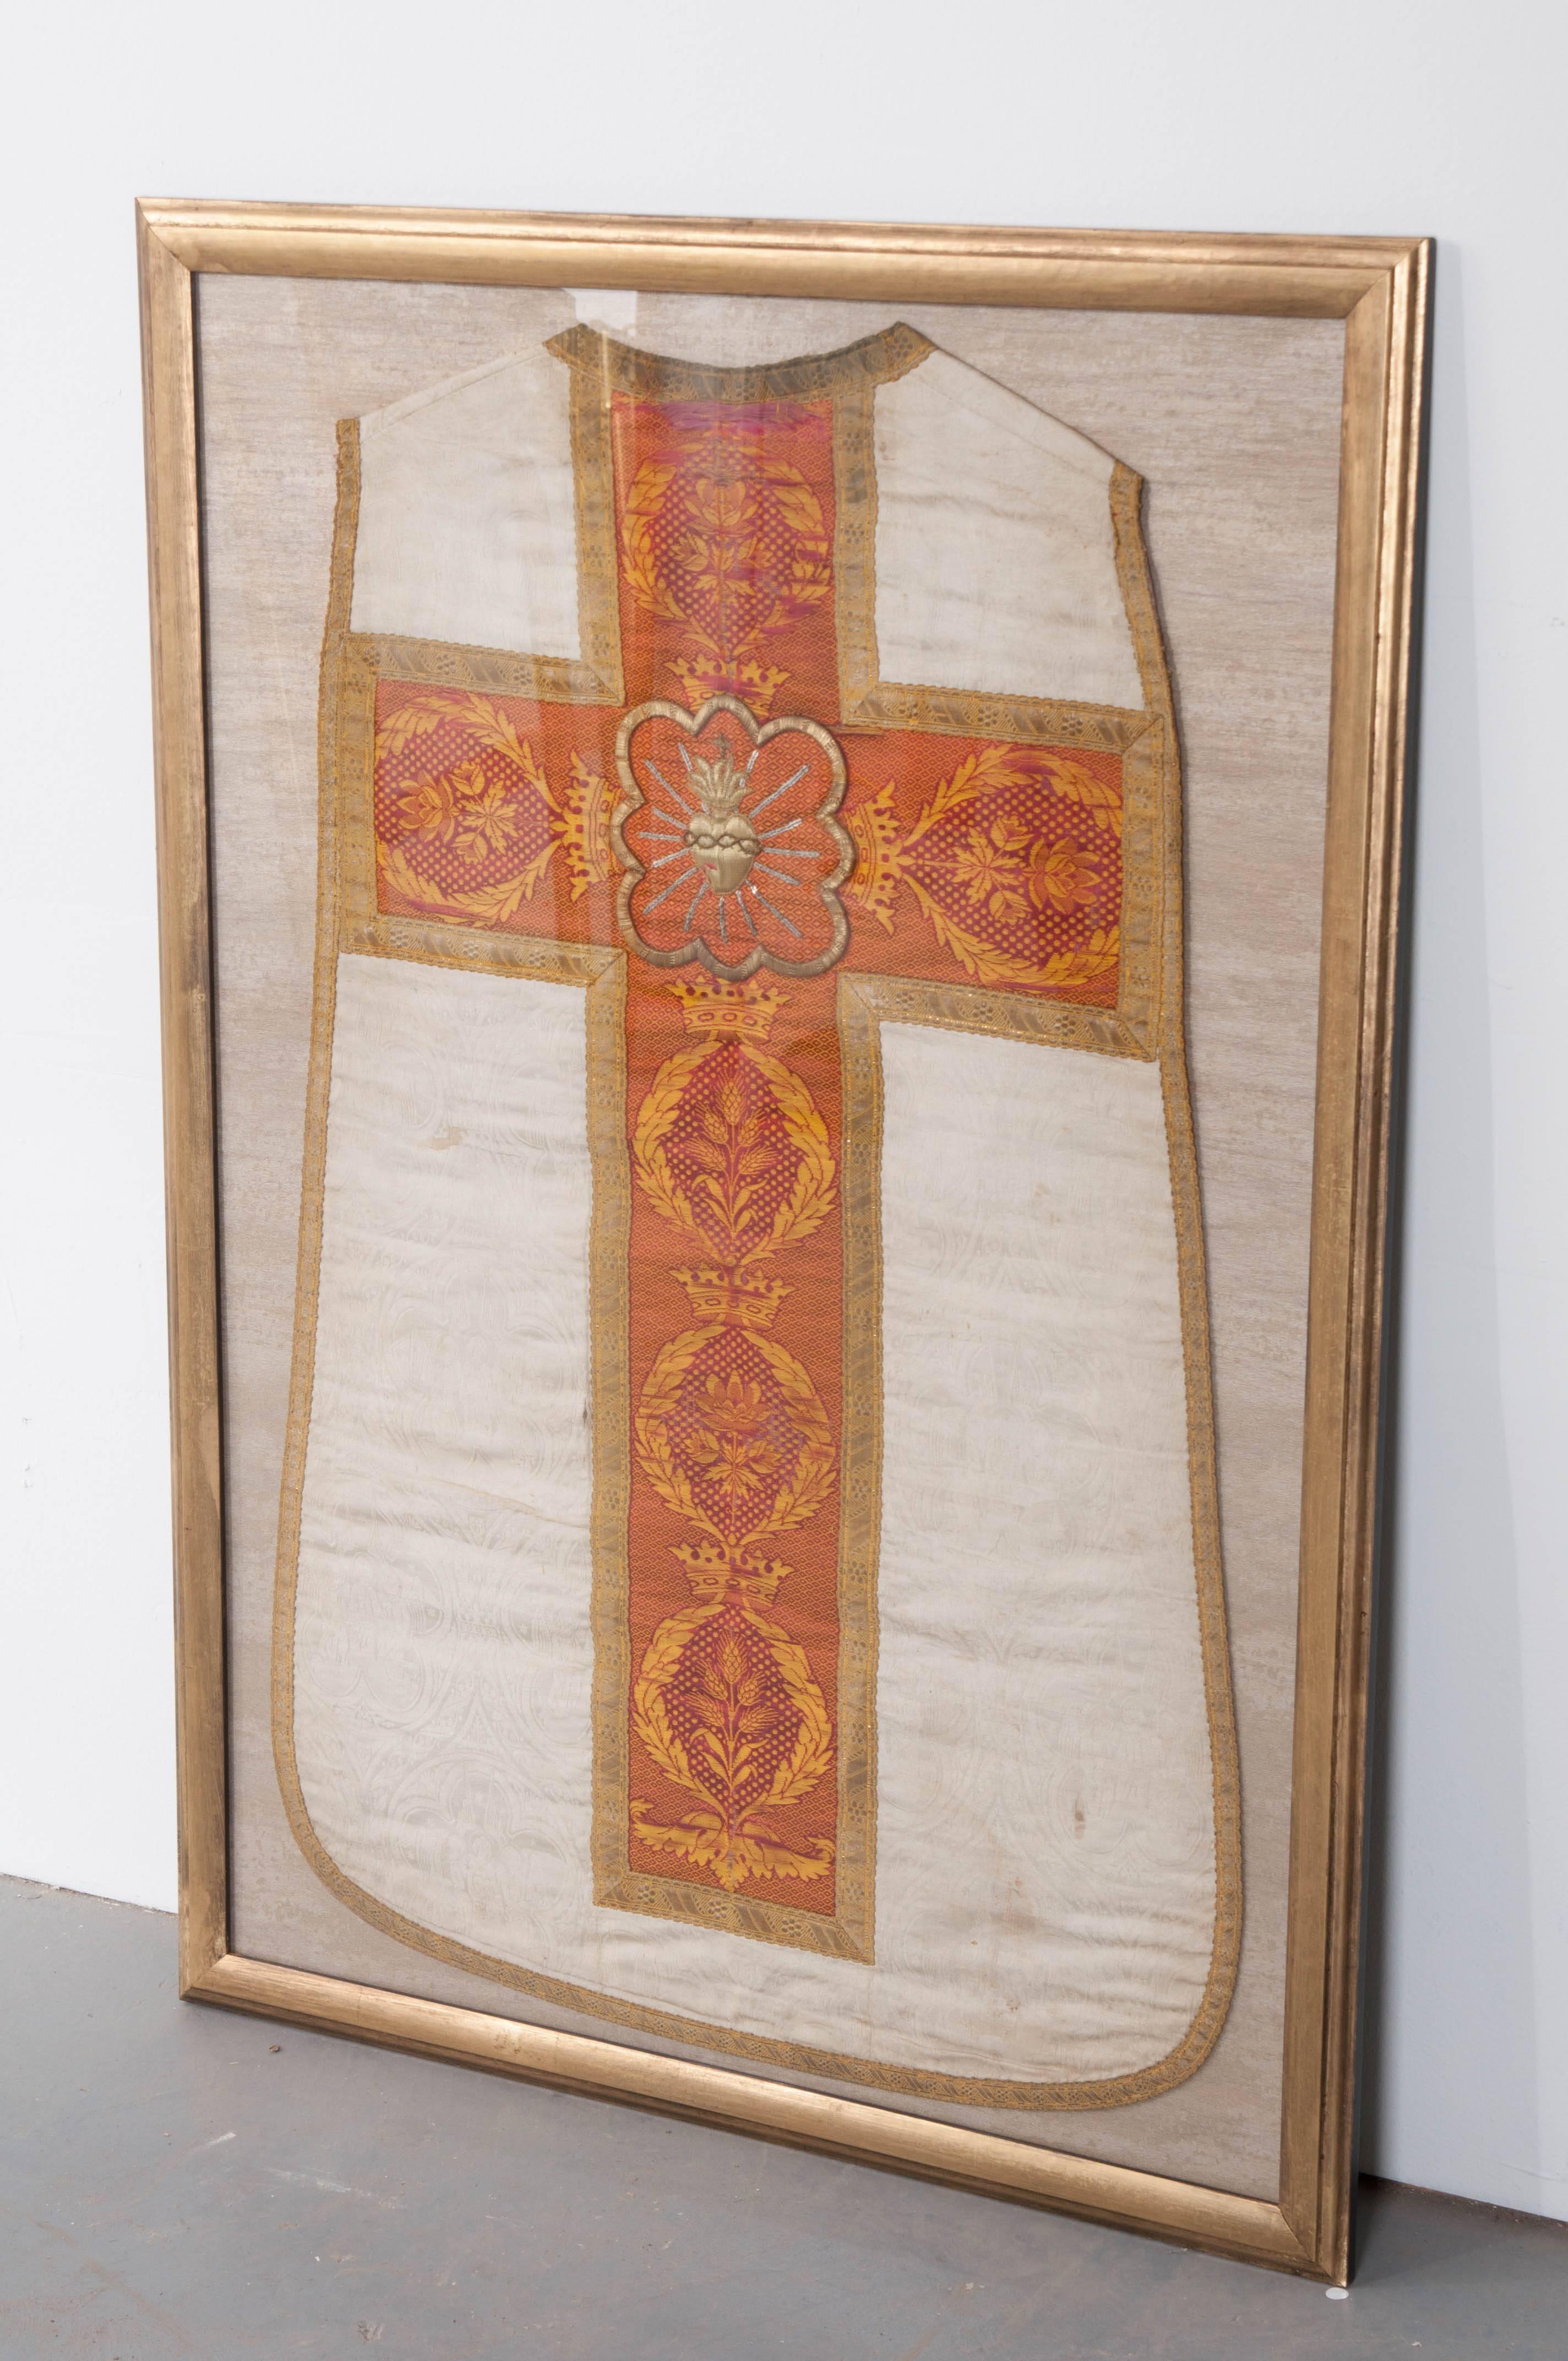 Embroidered 19th Century Dutch Religious Robe, Framed